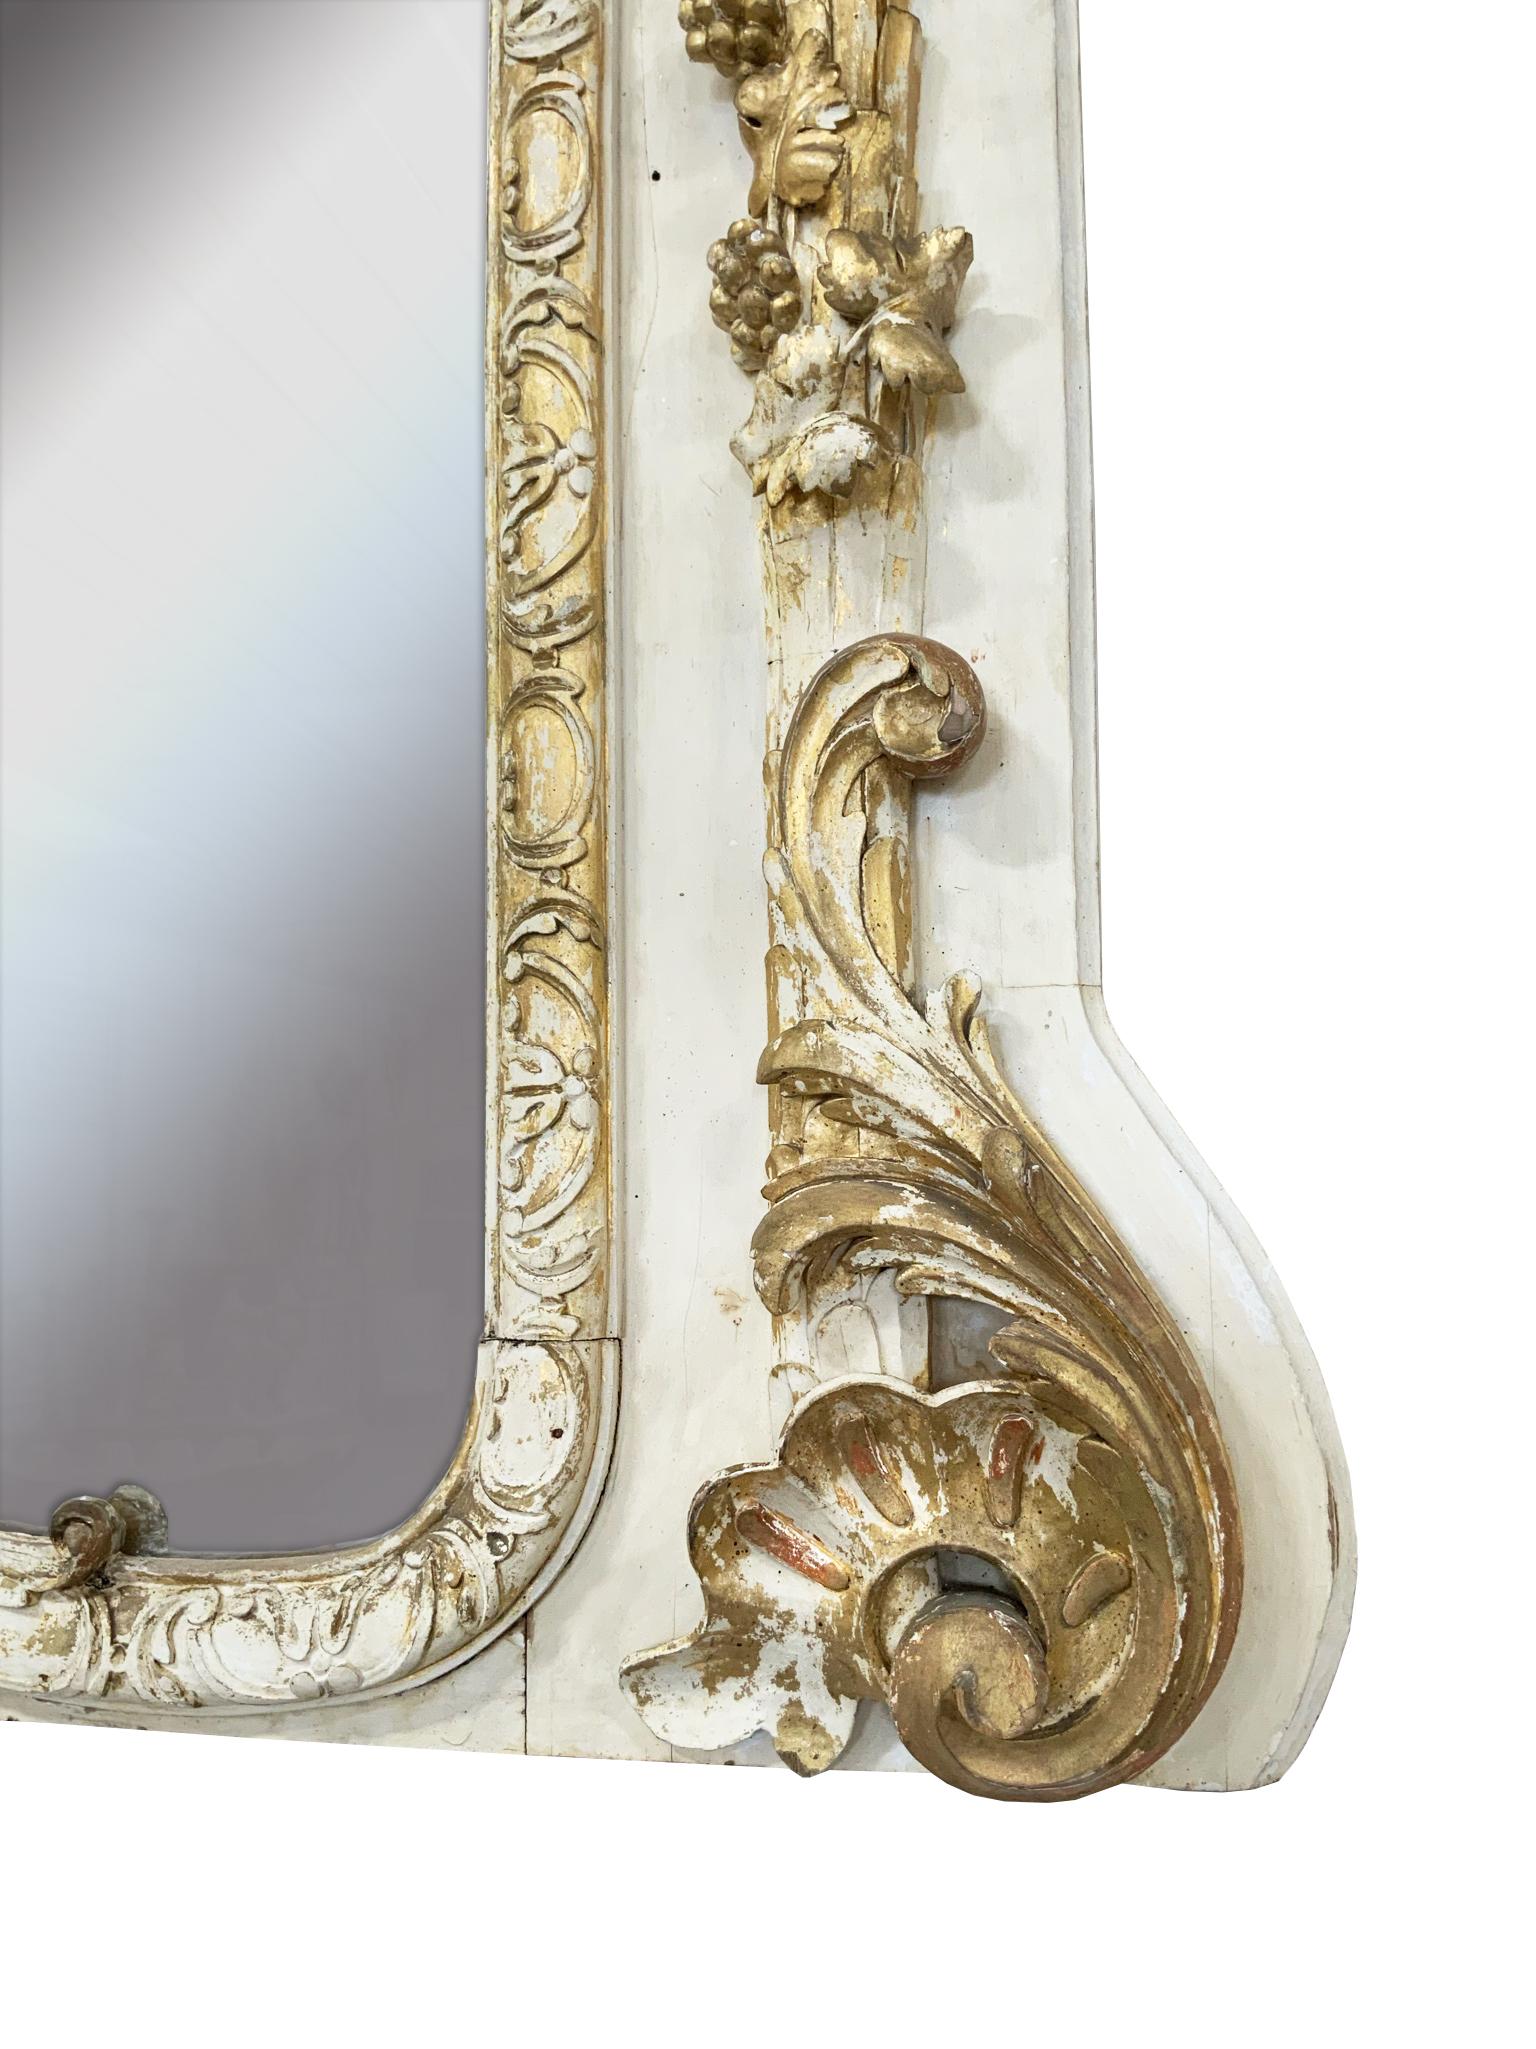 Stunning 19th century white/cream and gold mirror with gorgeous carving and gold embellishments.